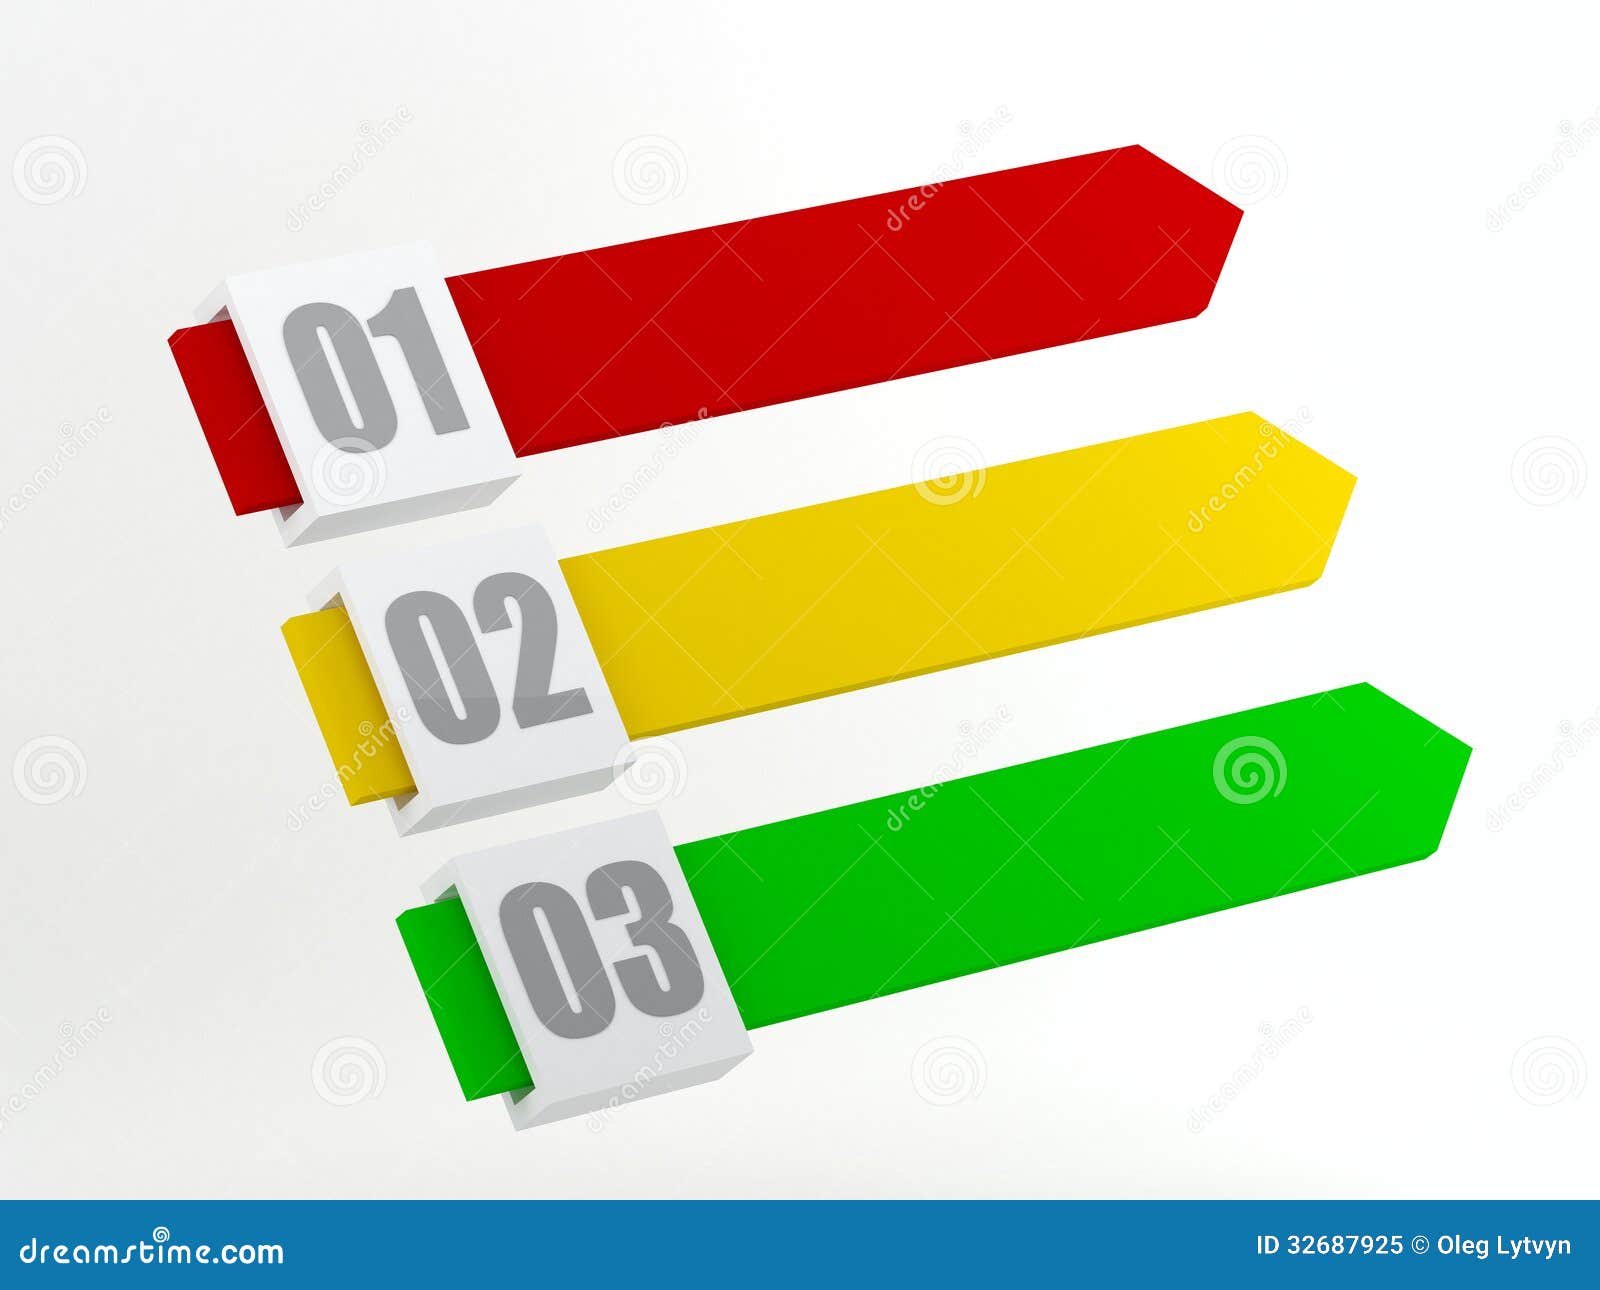 Colored Stripes with Numbers Stock Illustration - Illustration of ...